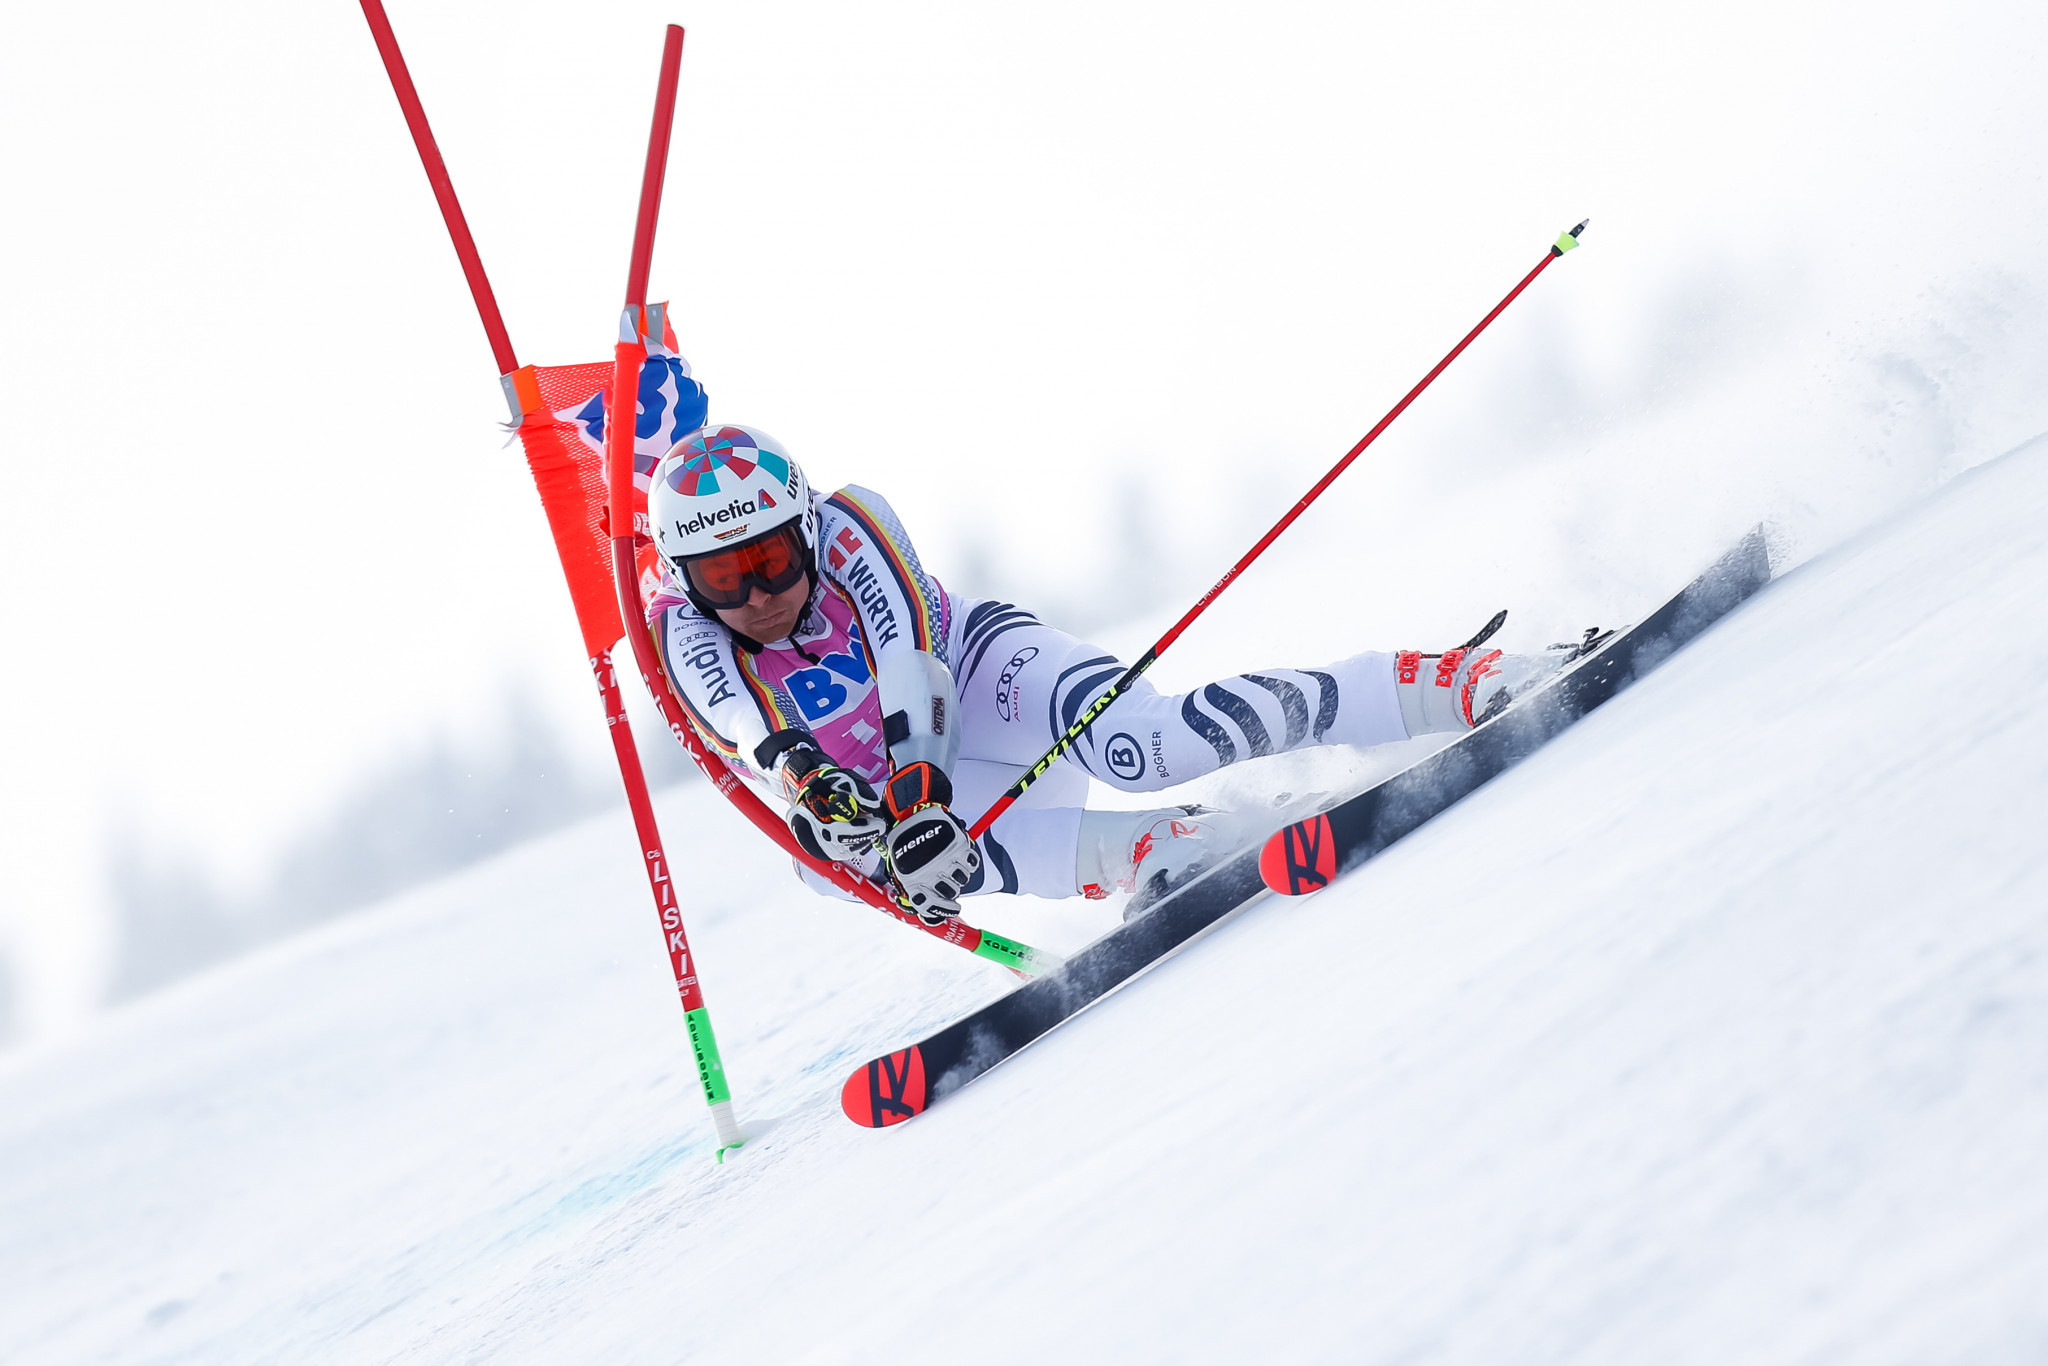 The loss of the initial appeal meant the 100 points awarded for a World Cup win were not included in Stefan Luitz's total, impacting his start position in Adelboden ©Getty Images